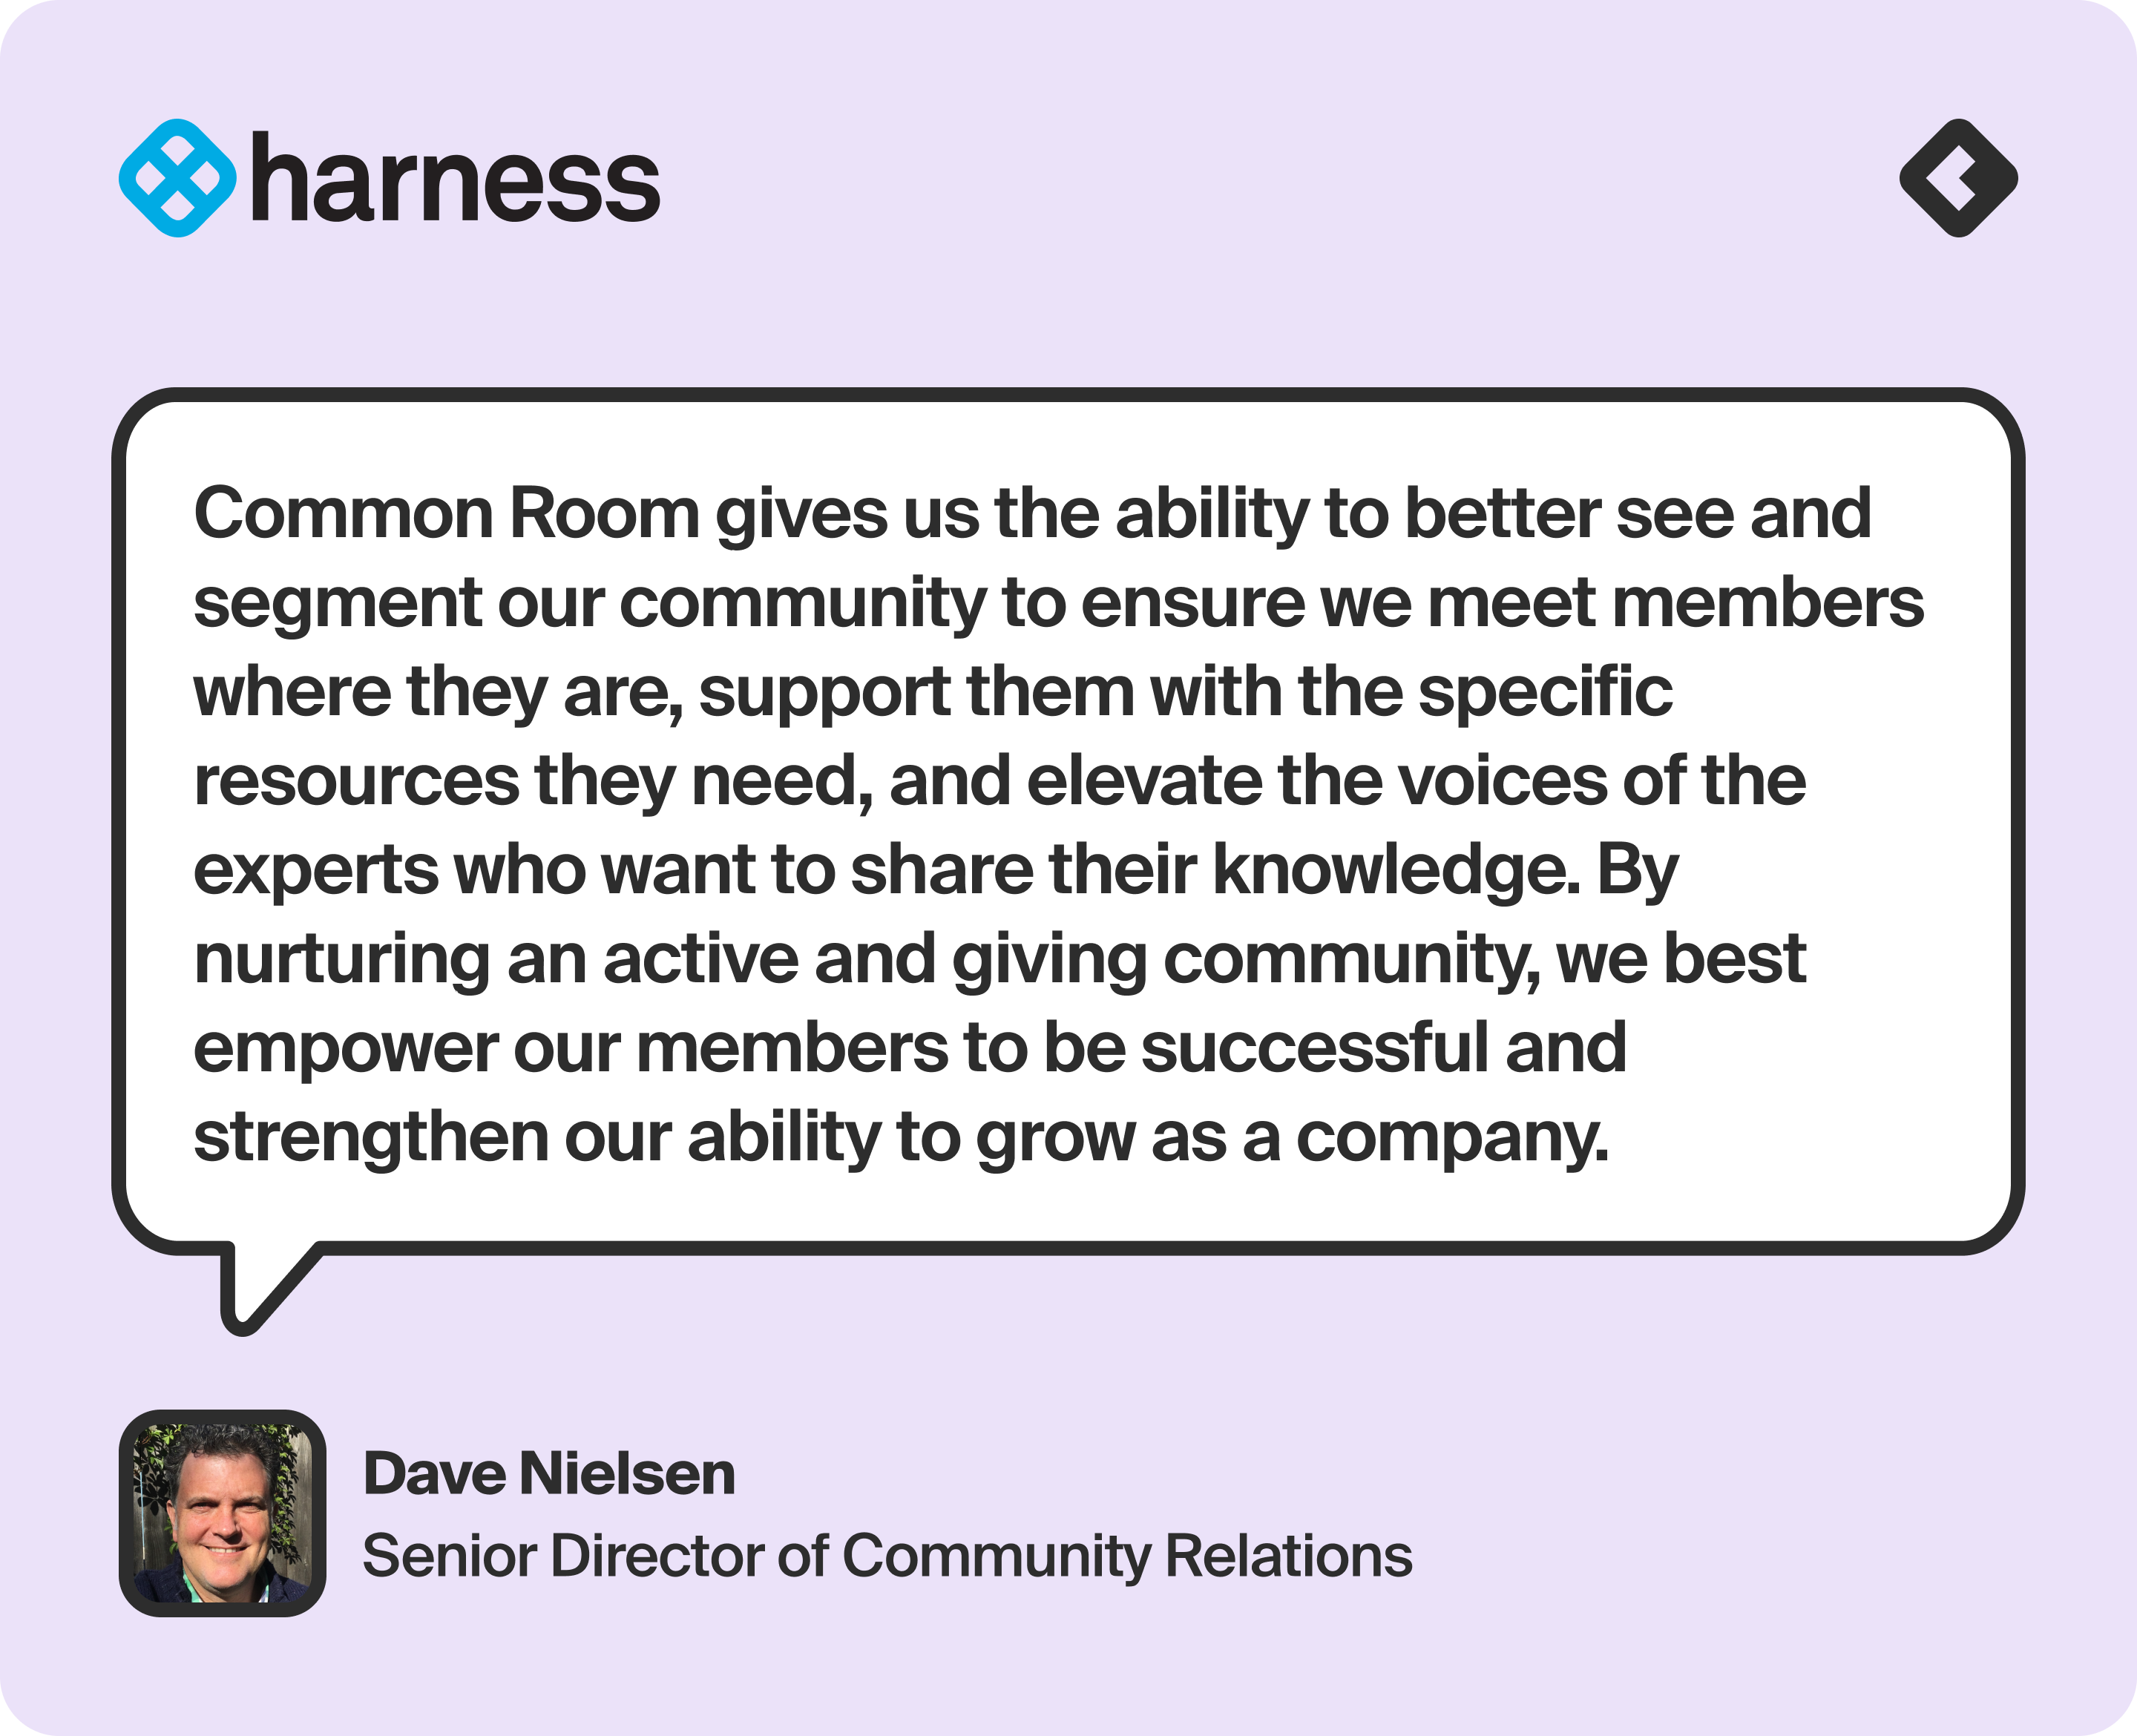 “Common Room gives us the ability to better see and segment our community to ensure we meet members where they are, support them with the specific resources they need, and elevate the voices of the experts who want to share their knowledge. By nurturing an active and giving community, we best empower our members to be successful and strengthen our ability to grow as a company.” — Dave Nielsen, Senior Director of Community Relations